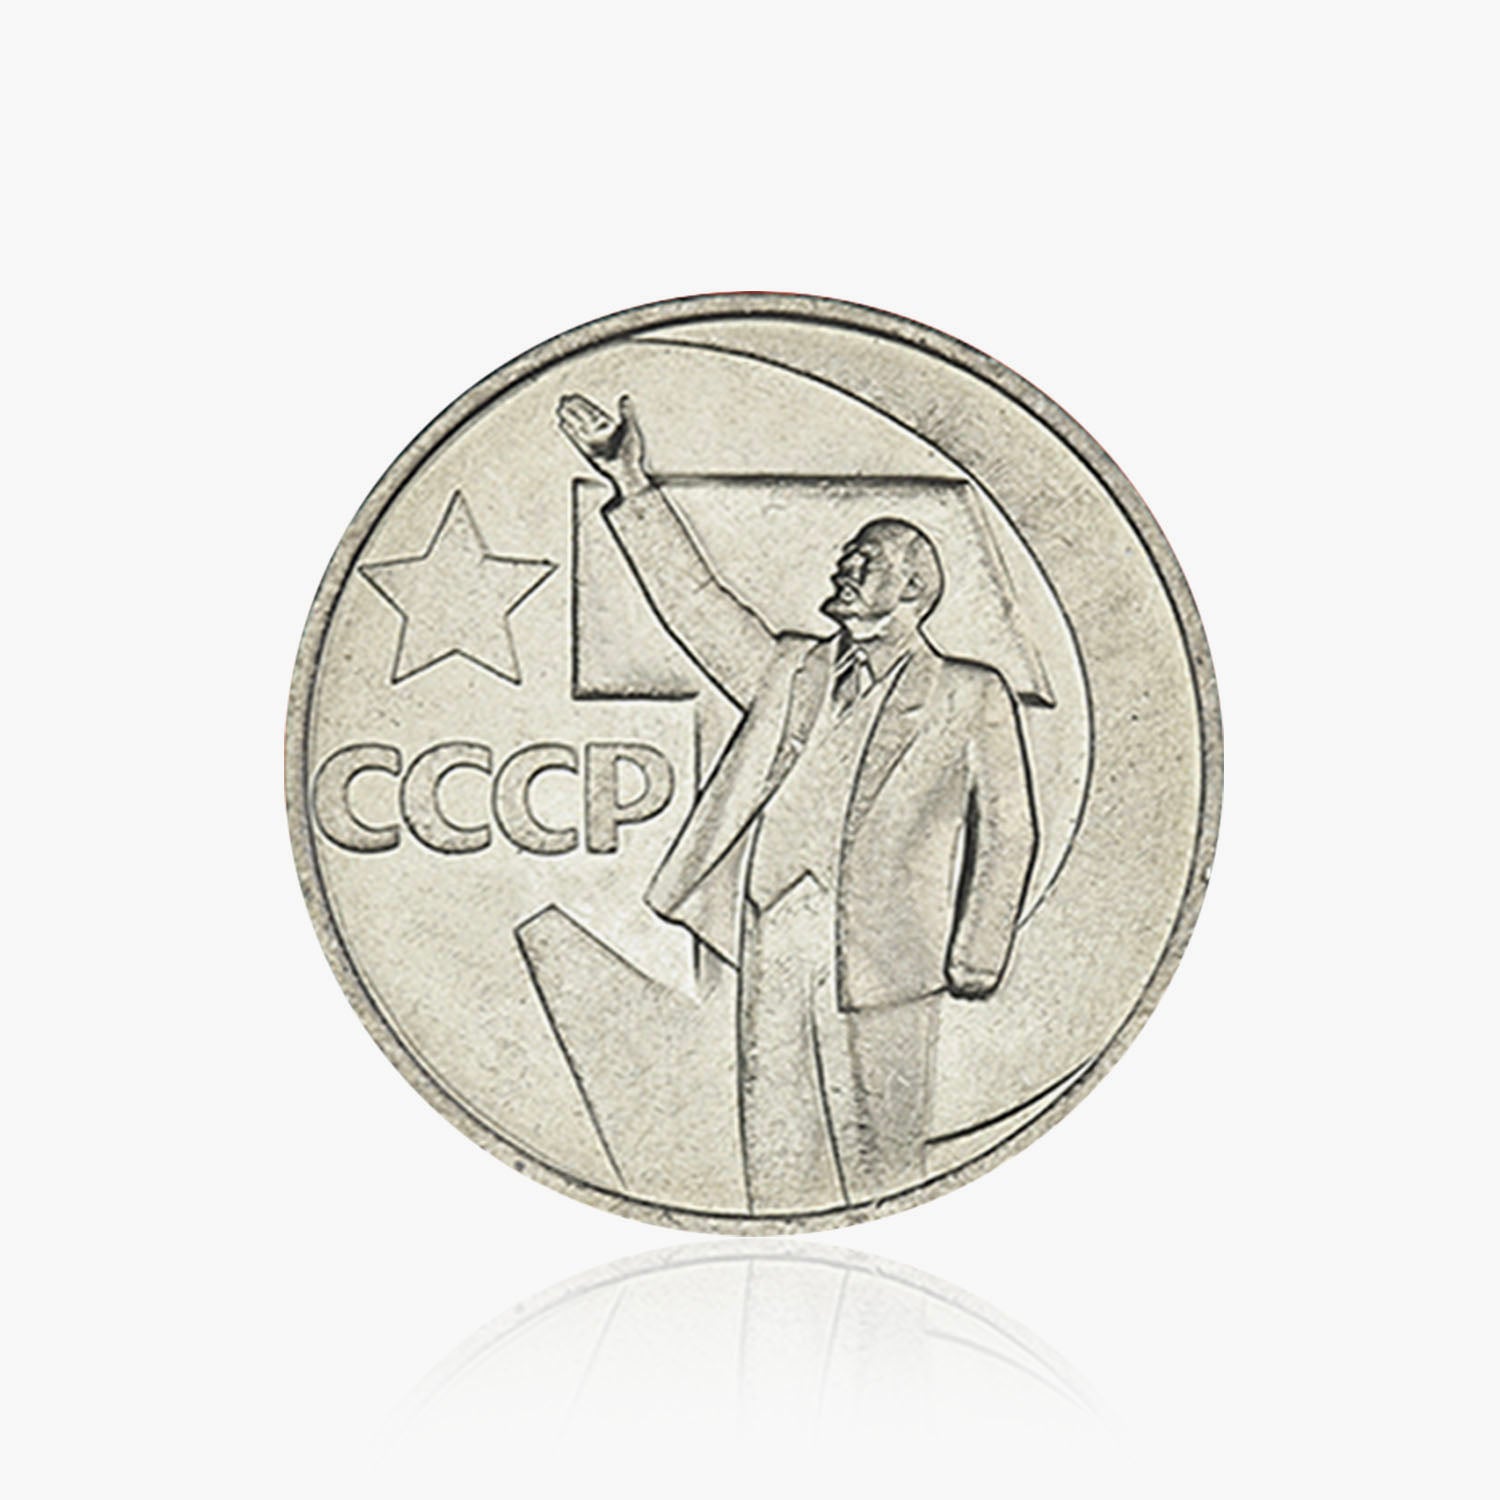 The Russian Drinking Coin